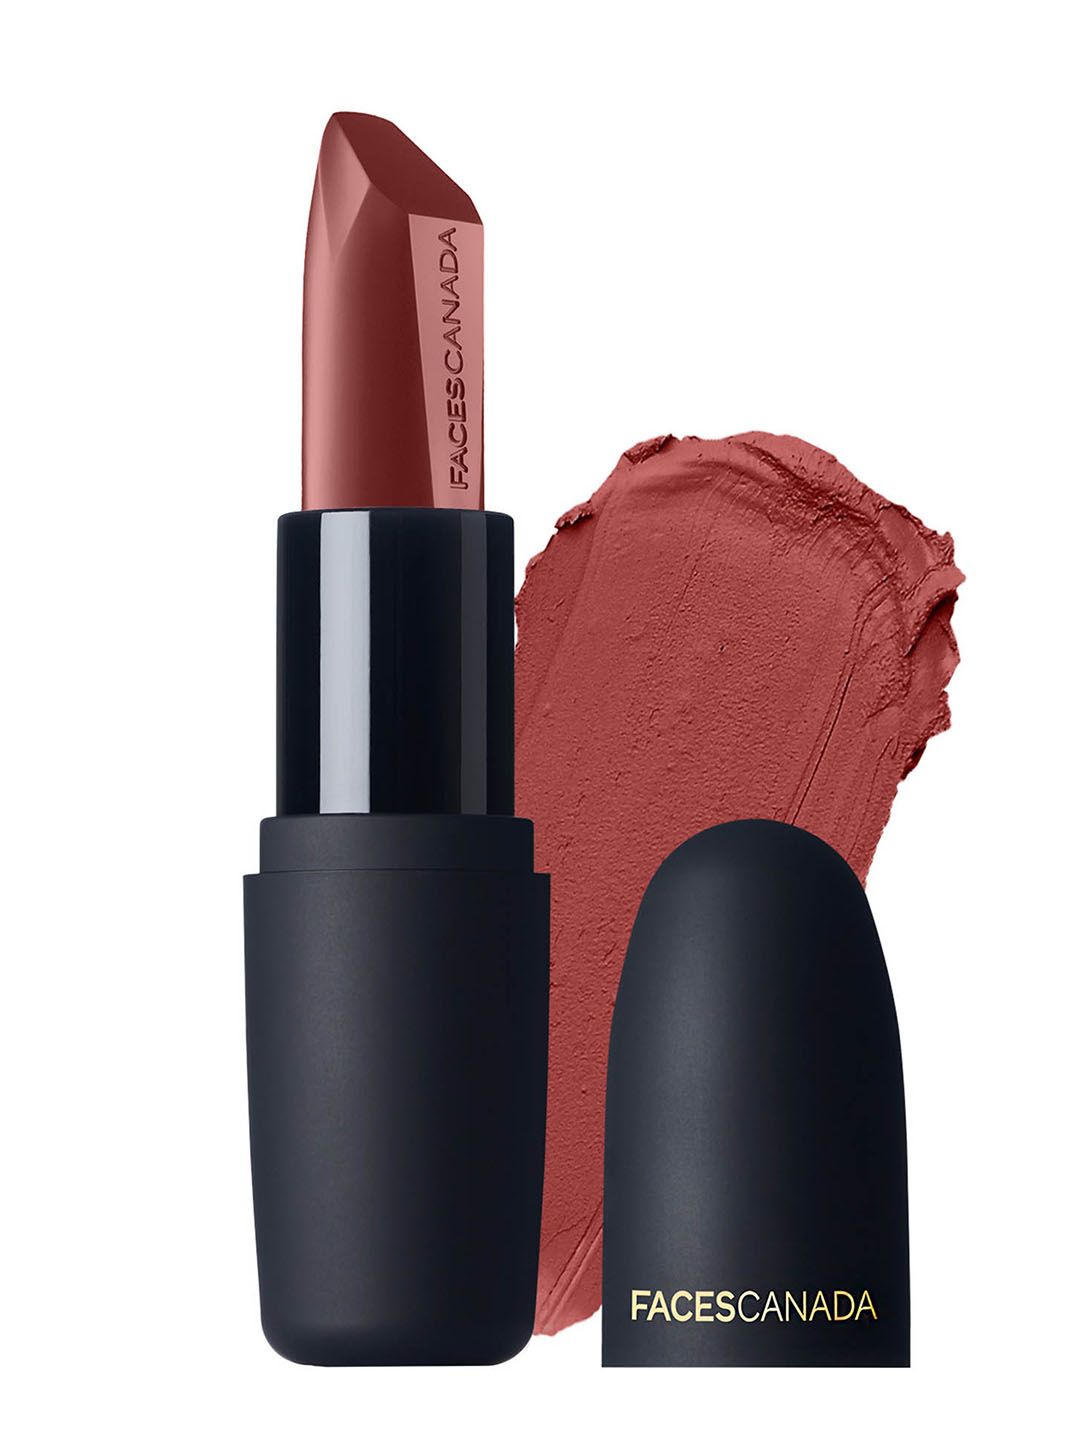 Faces Canada Weightless Matte Hydrating Lipstick with Almond Oil - Red Fairy 23 Price in India